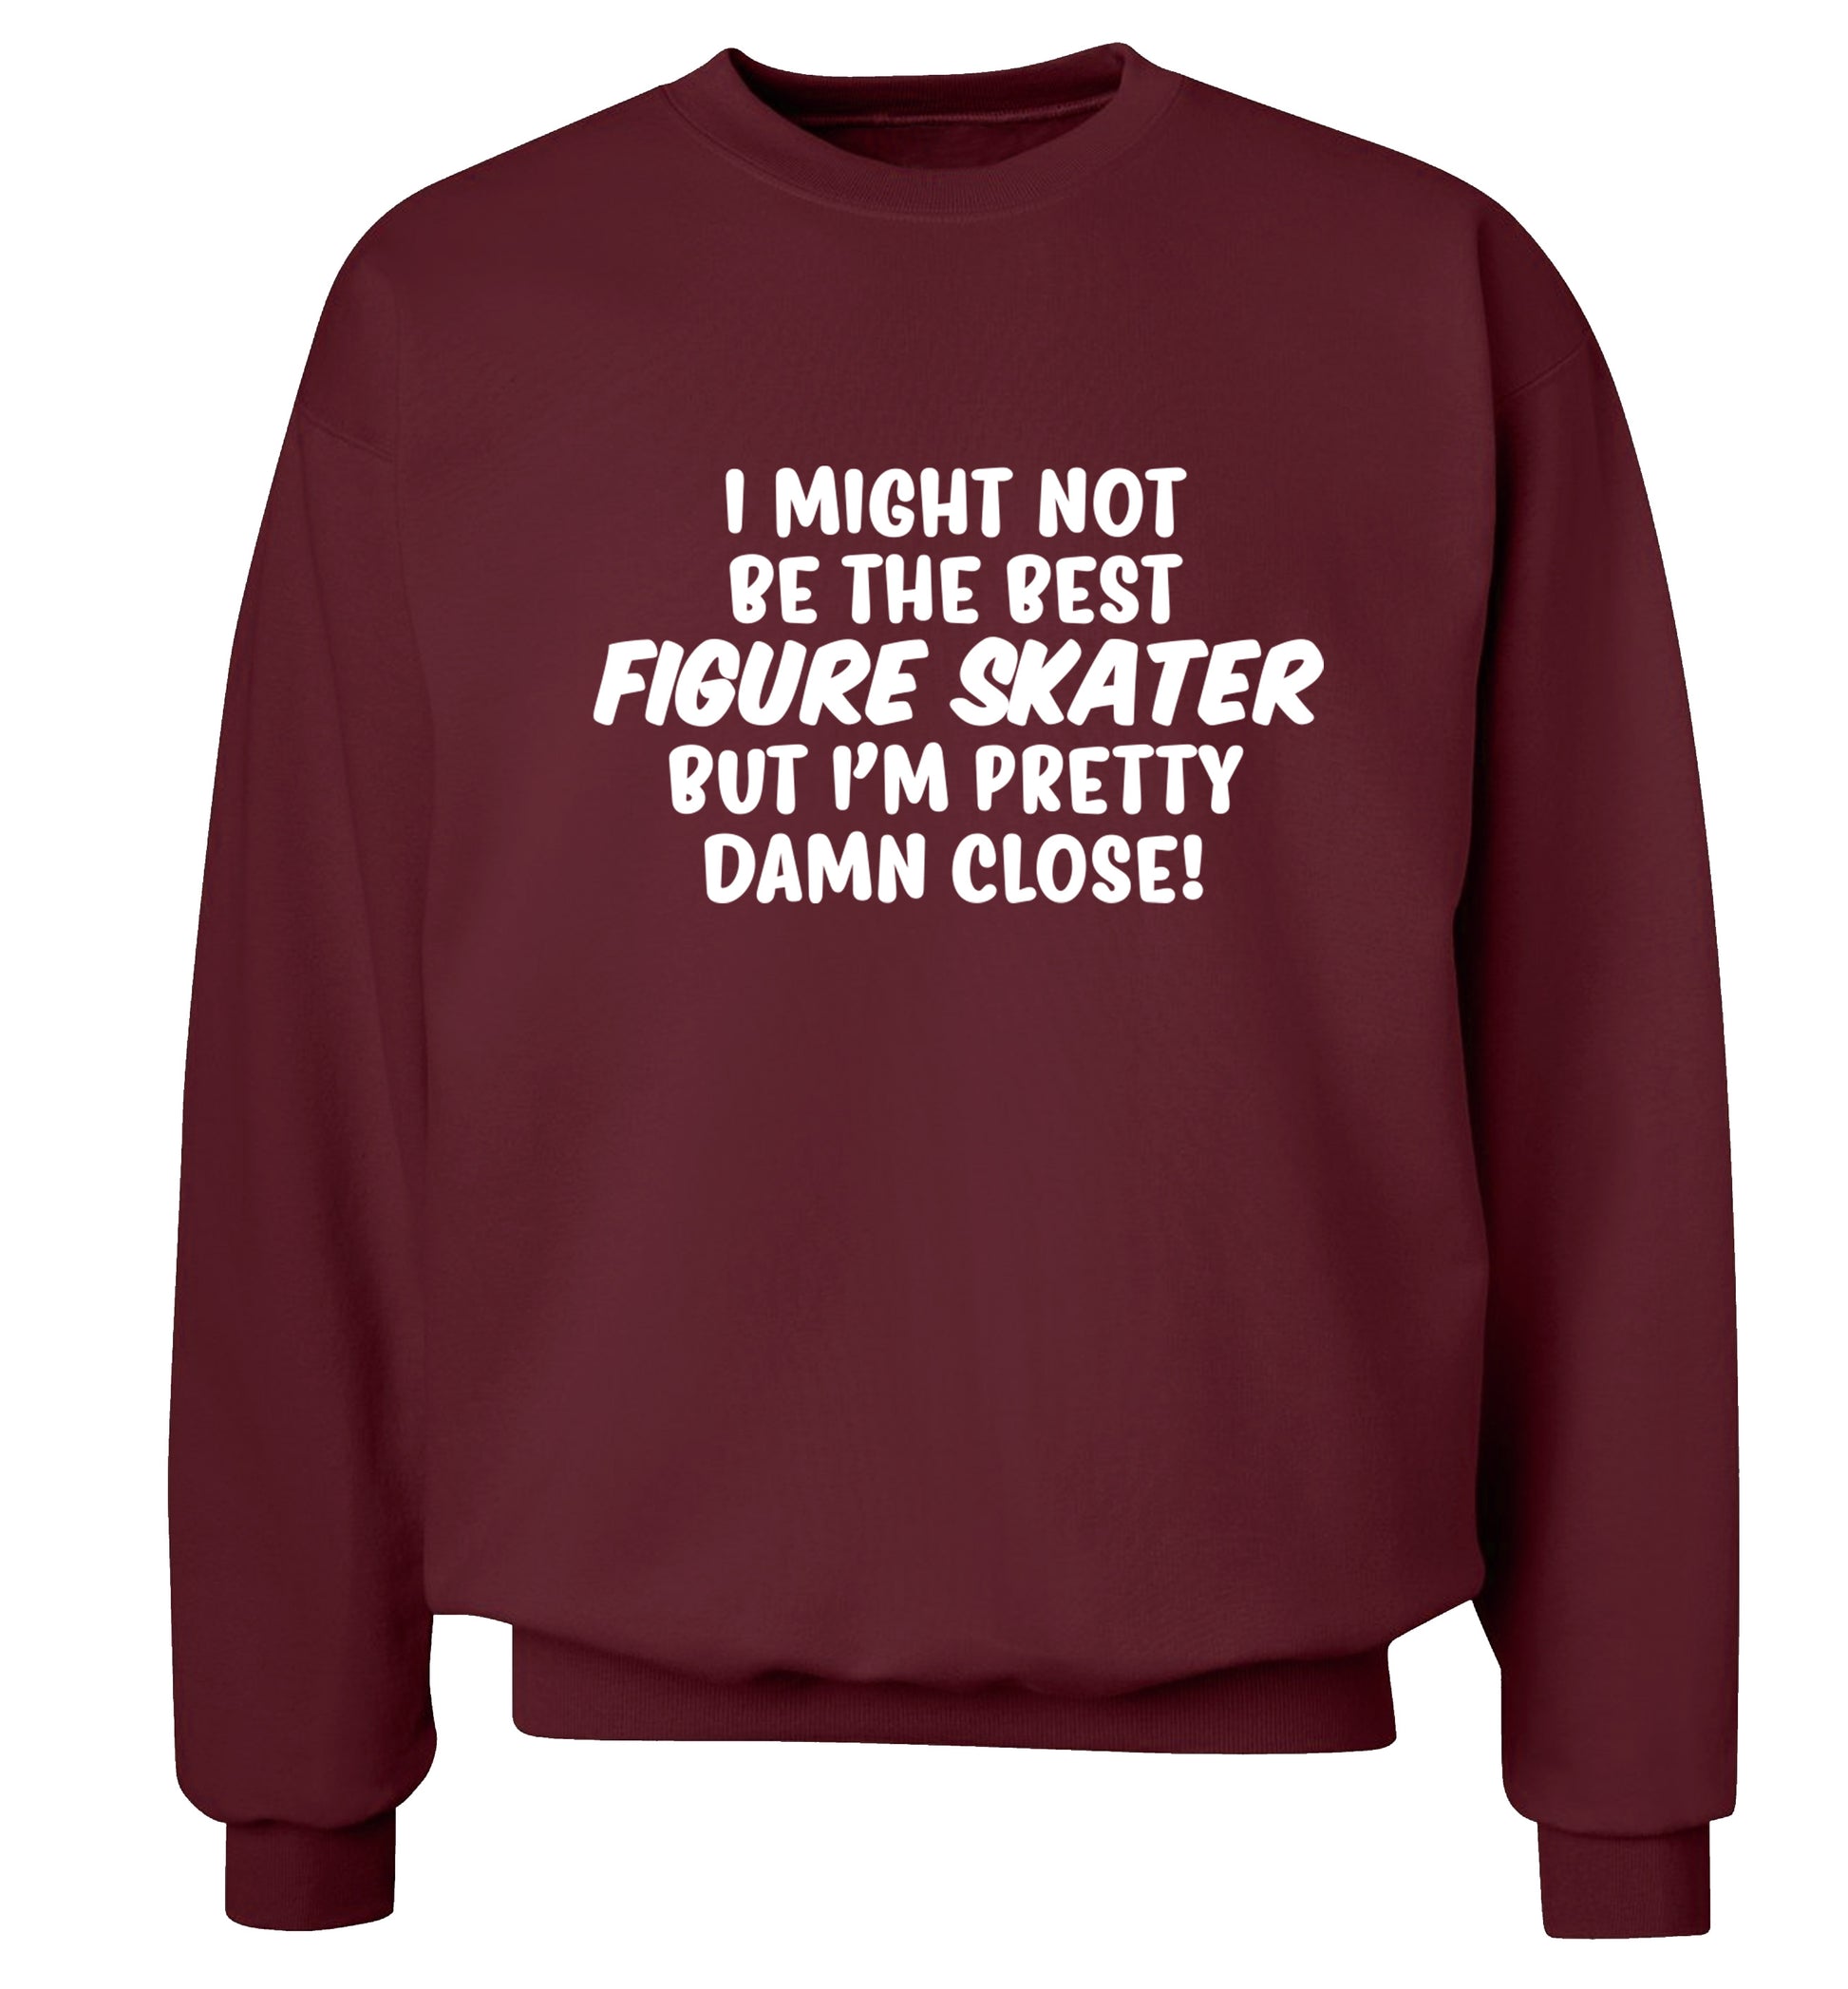 I might not be the best figure skater but I'm pretty damn close! Adult's unisexmaroon Sweater 2XL